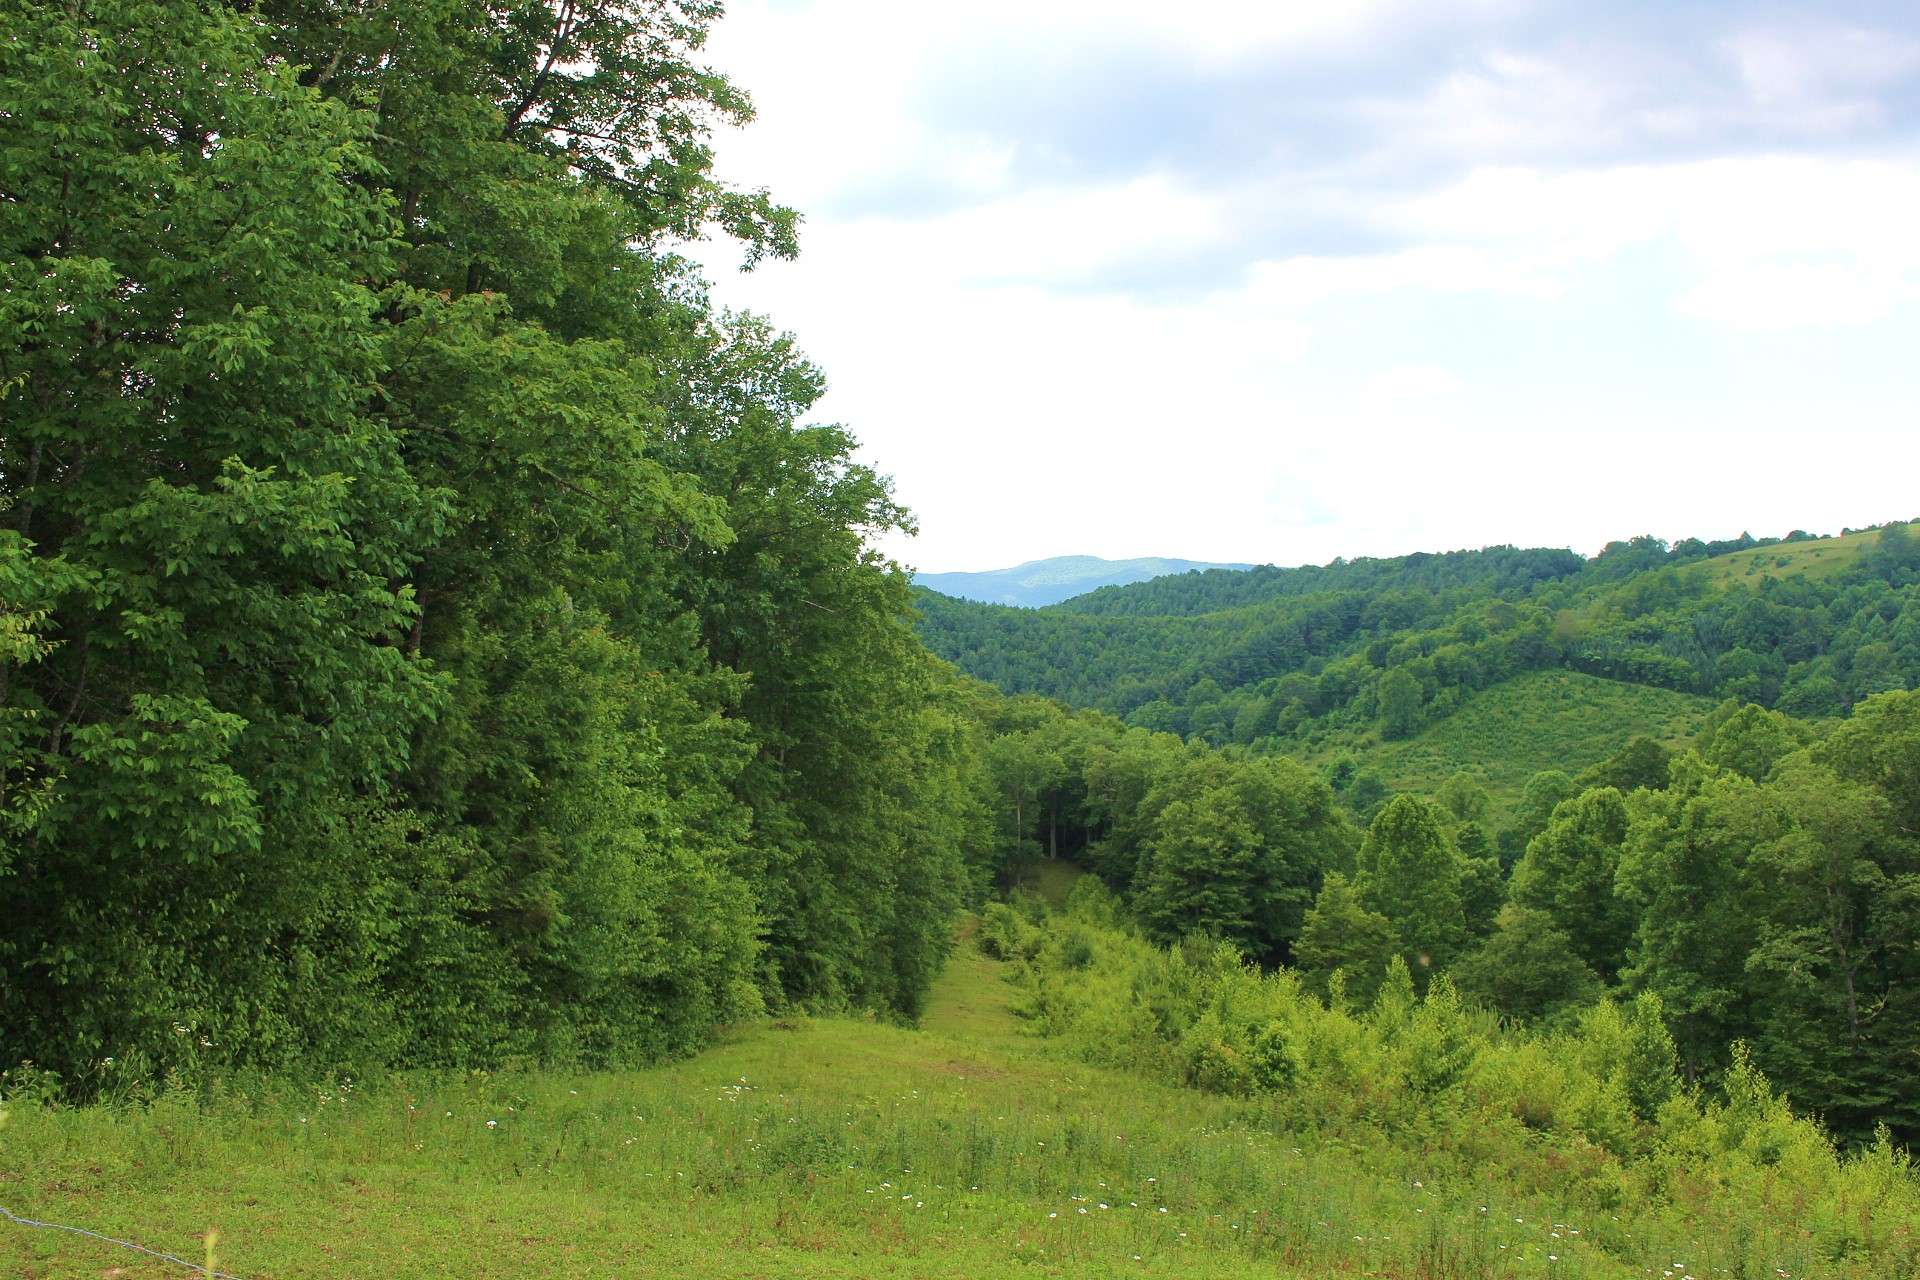 There are so many options and opportunities for you with this 43+ acre tract located in the Creston area of Northwestern Ashe County and close to the amenities of Boone, West Jefferson, and the Grayson Highlands areas. Offered at $150,000, this land awaits your vision for its future. Call for additional information on listing S265.